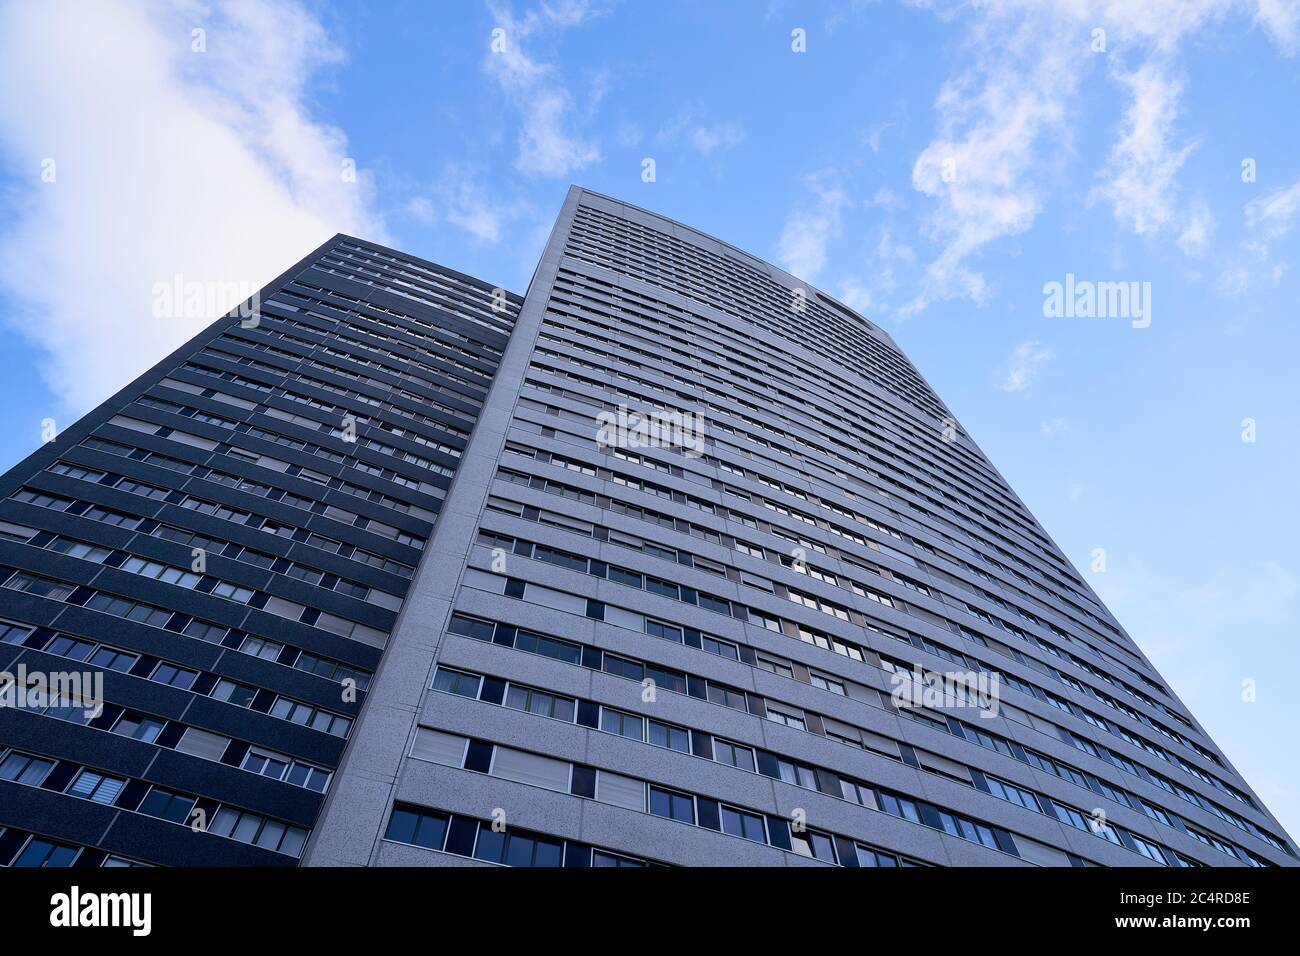 Tour Les Poissons is a 42-storey, 129.5 m (425ft) skyscraper completed in 1970 in Courbevoie, near La Défense business district, west of Paris, France Stock Photo